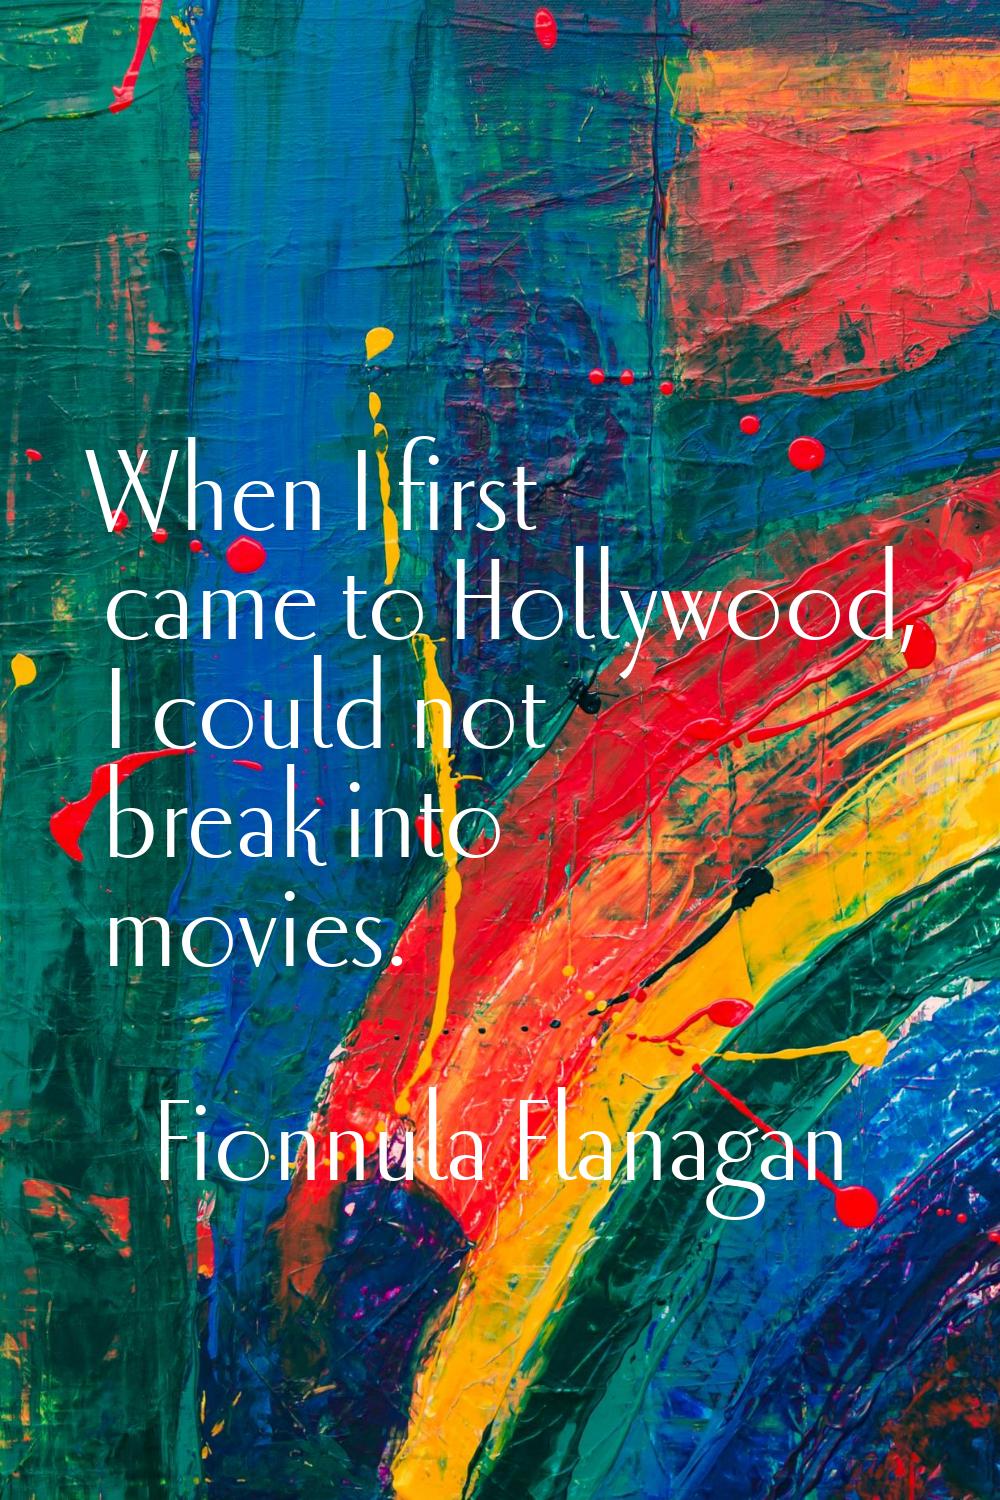 When I first came to Hollywood, I could not break into movies.